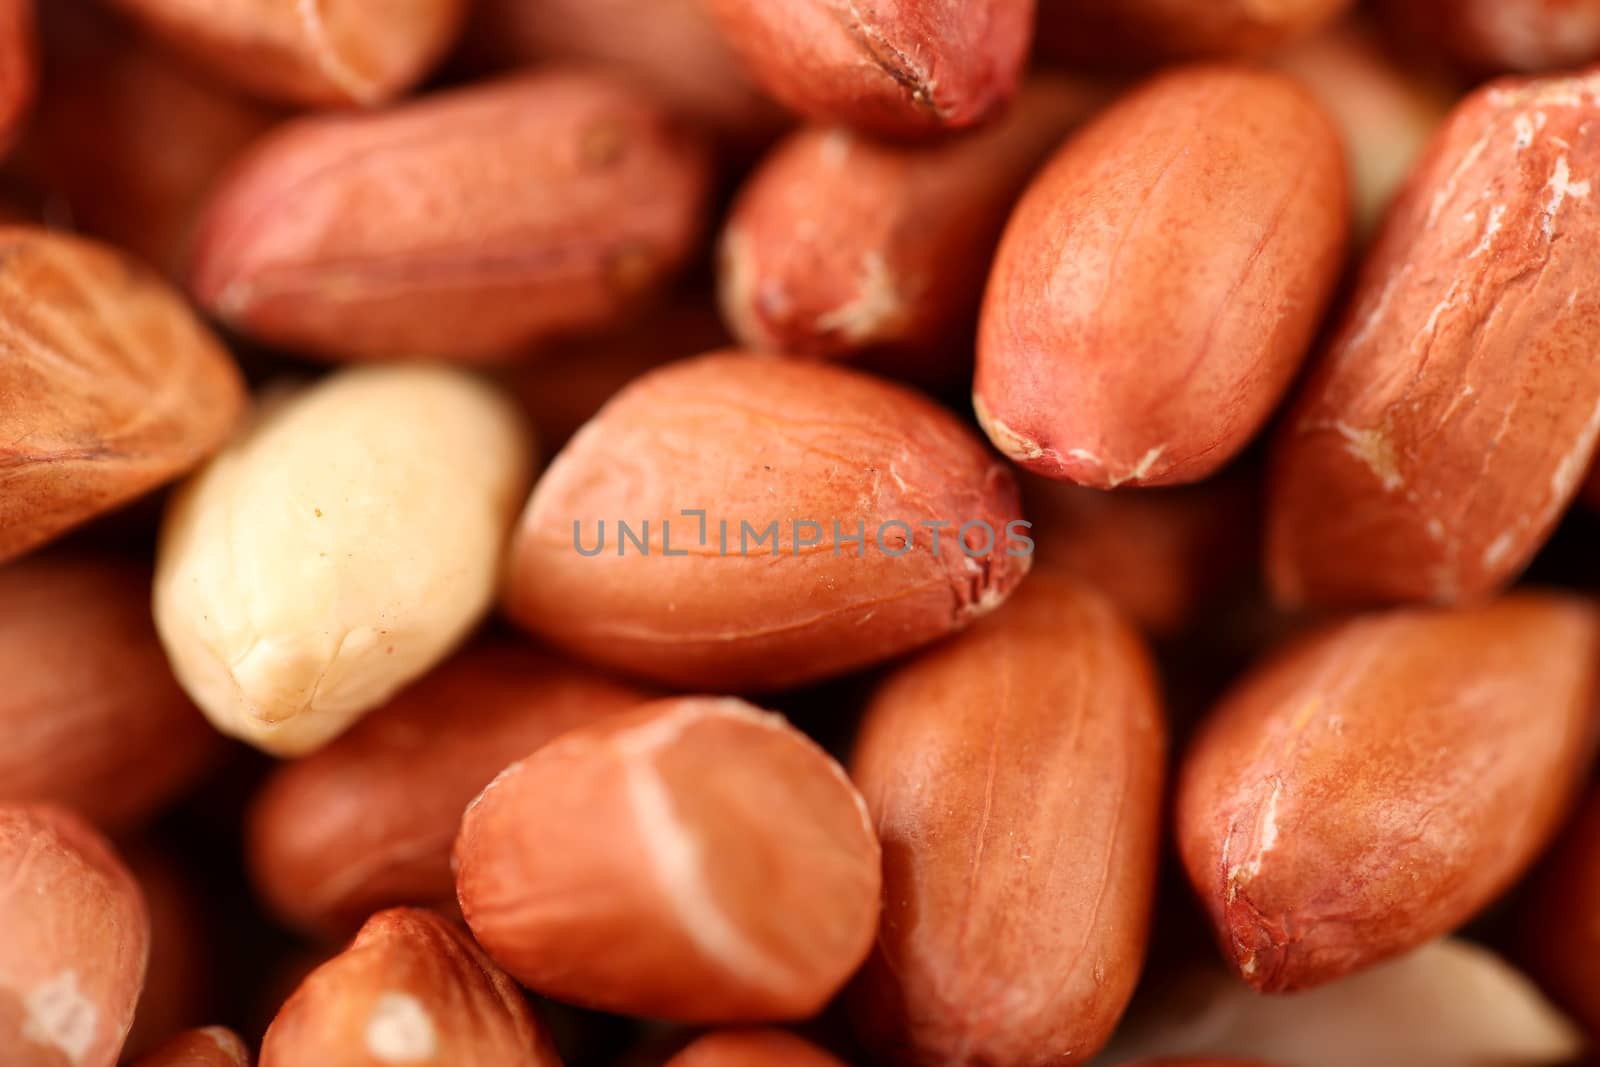 Extreme close-up image of peanuts by indigolotos